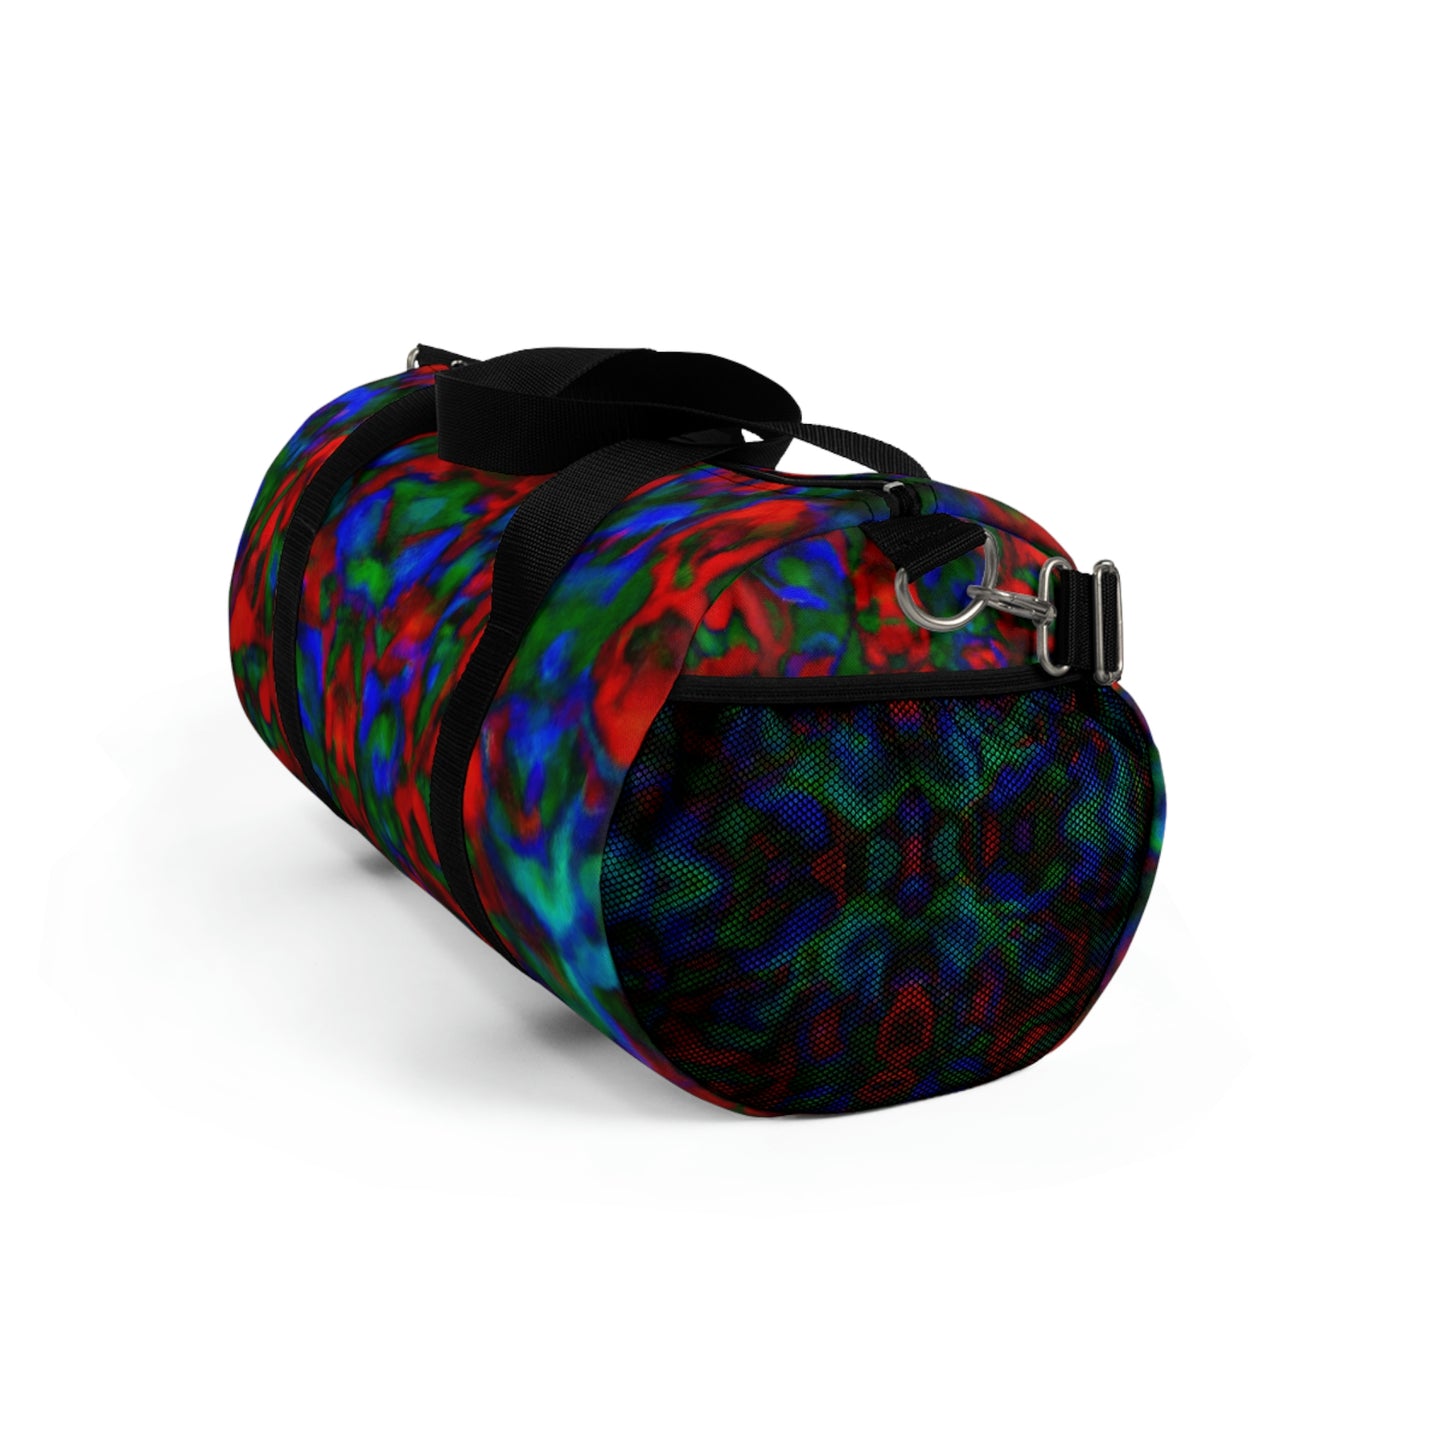 Aloise Luxe - Psychedelic Duffel Bag